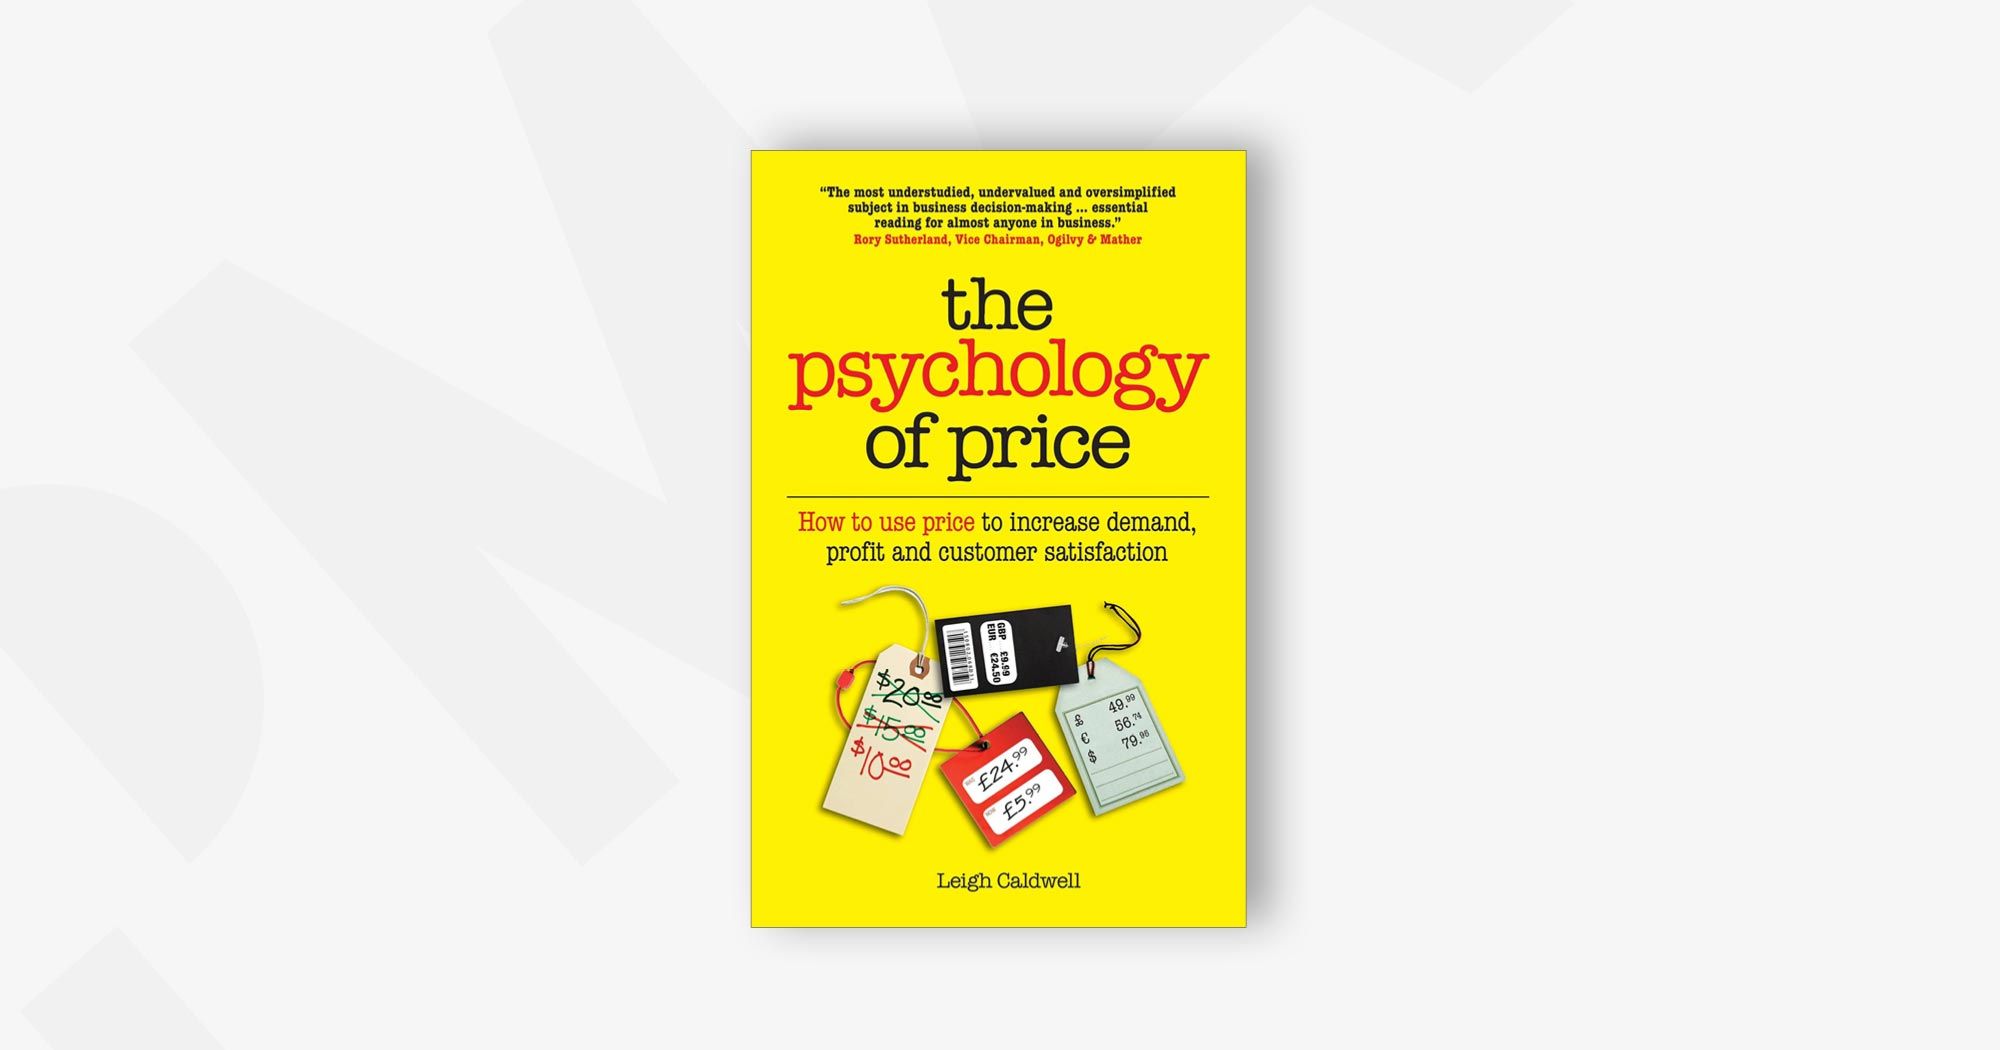 The Psychology of Price: How to use price to increase demand, profit and customer satisfaction – Leigh Caldwell